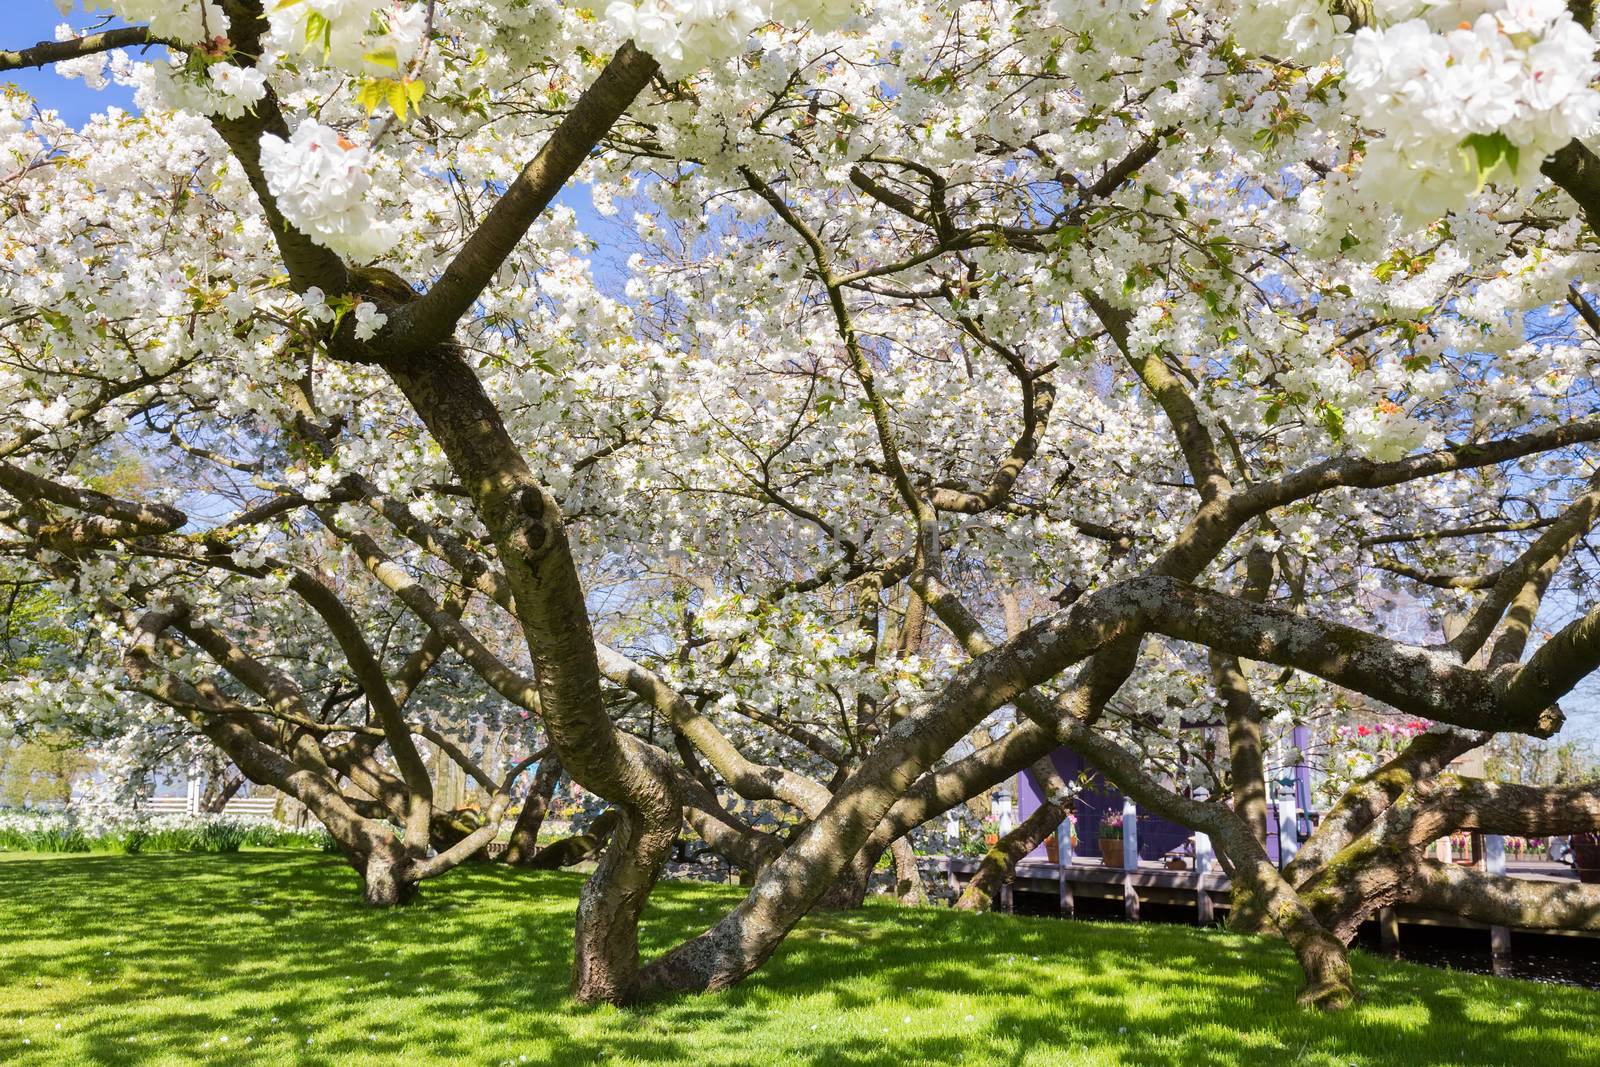 Flowering trees with white blossom in spring by BenSchonewille